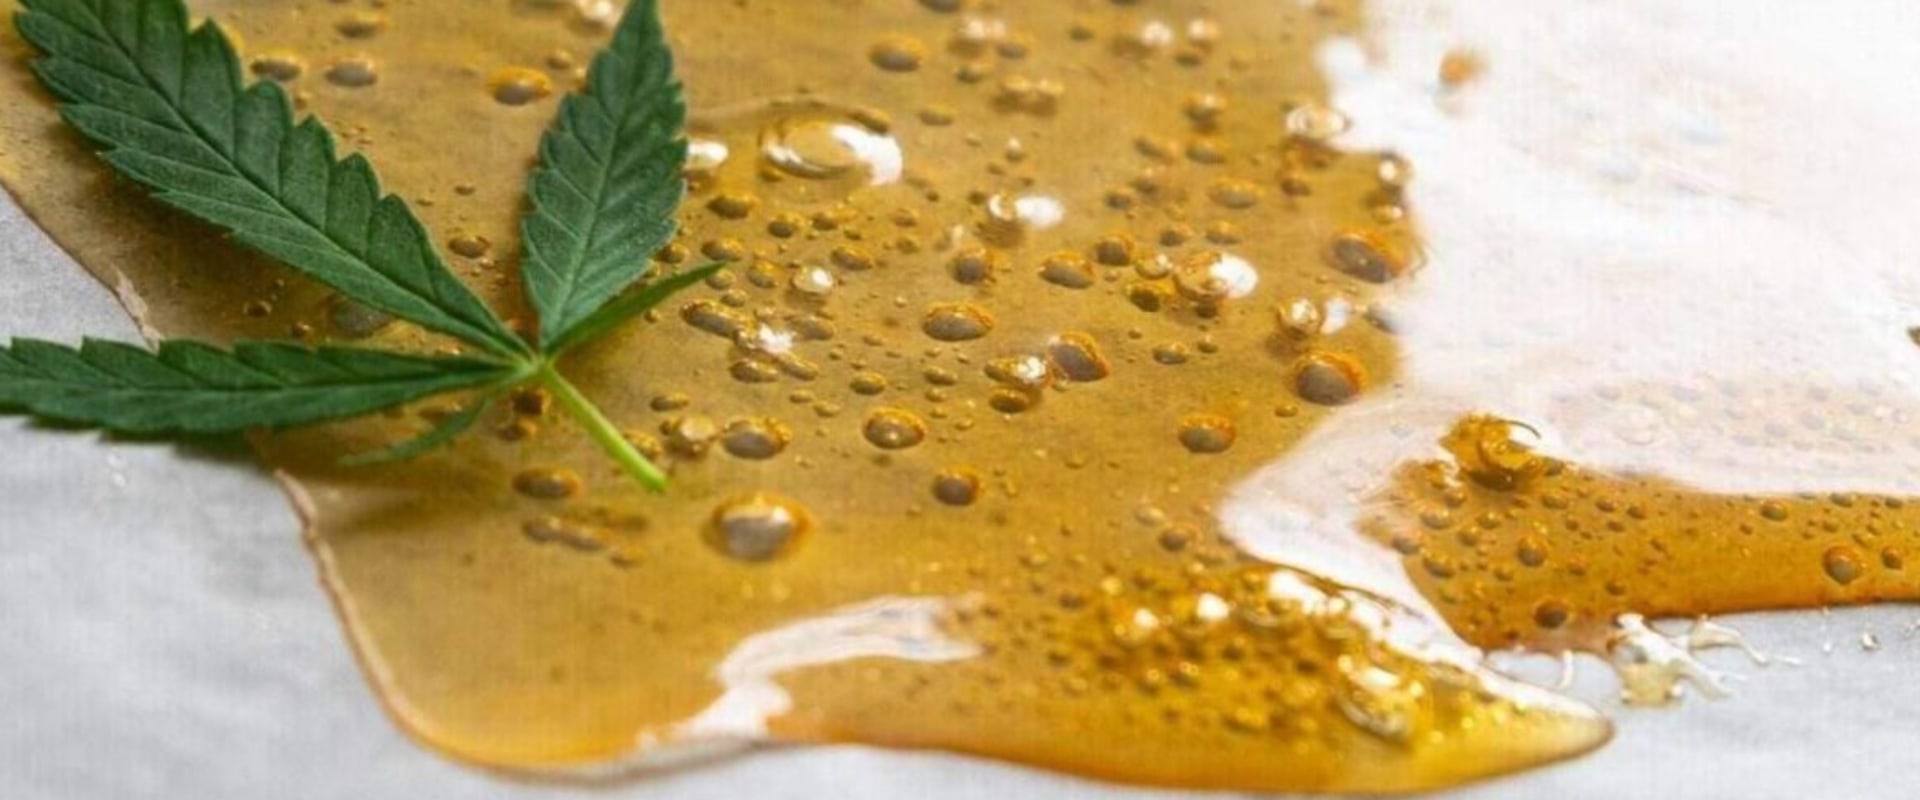 What is a good thc percentage for wax?